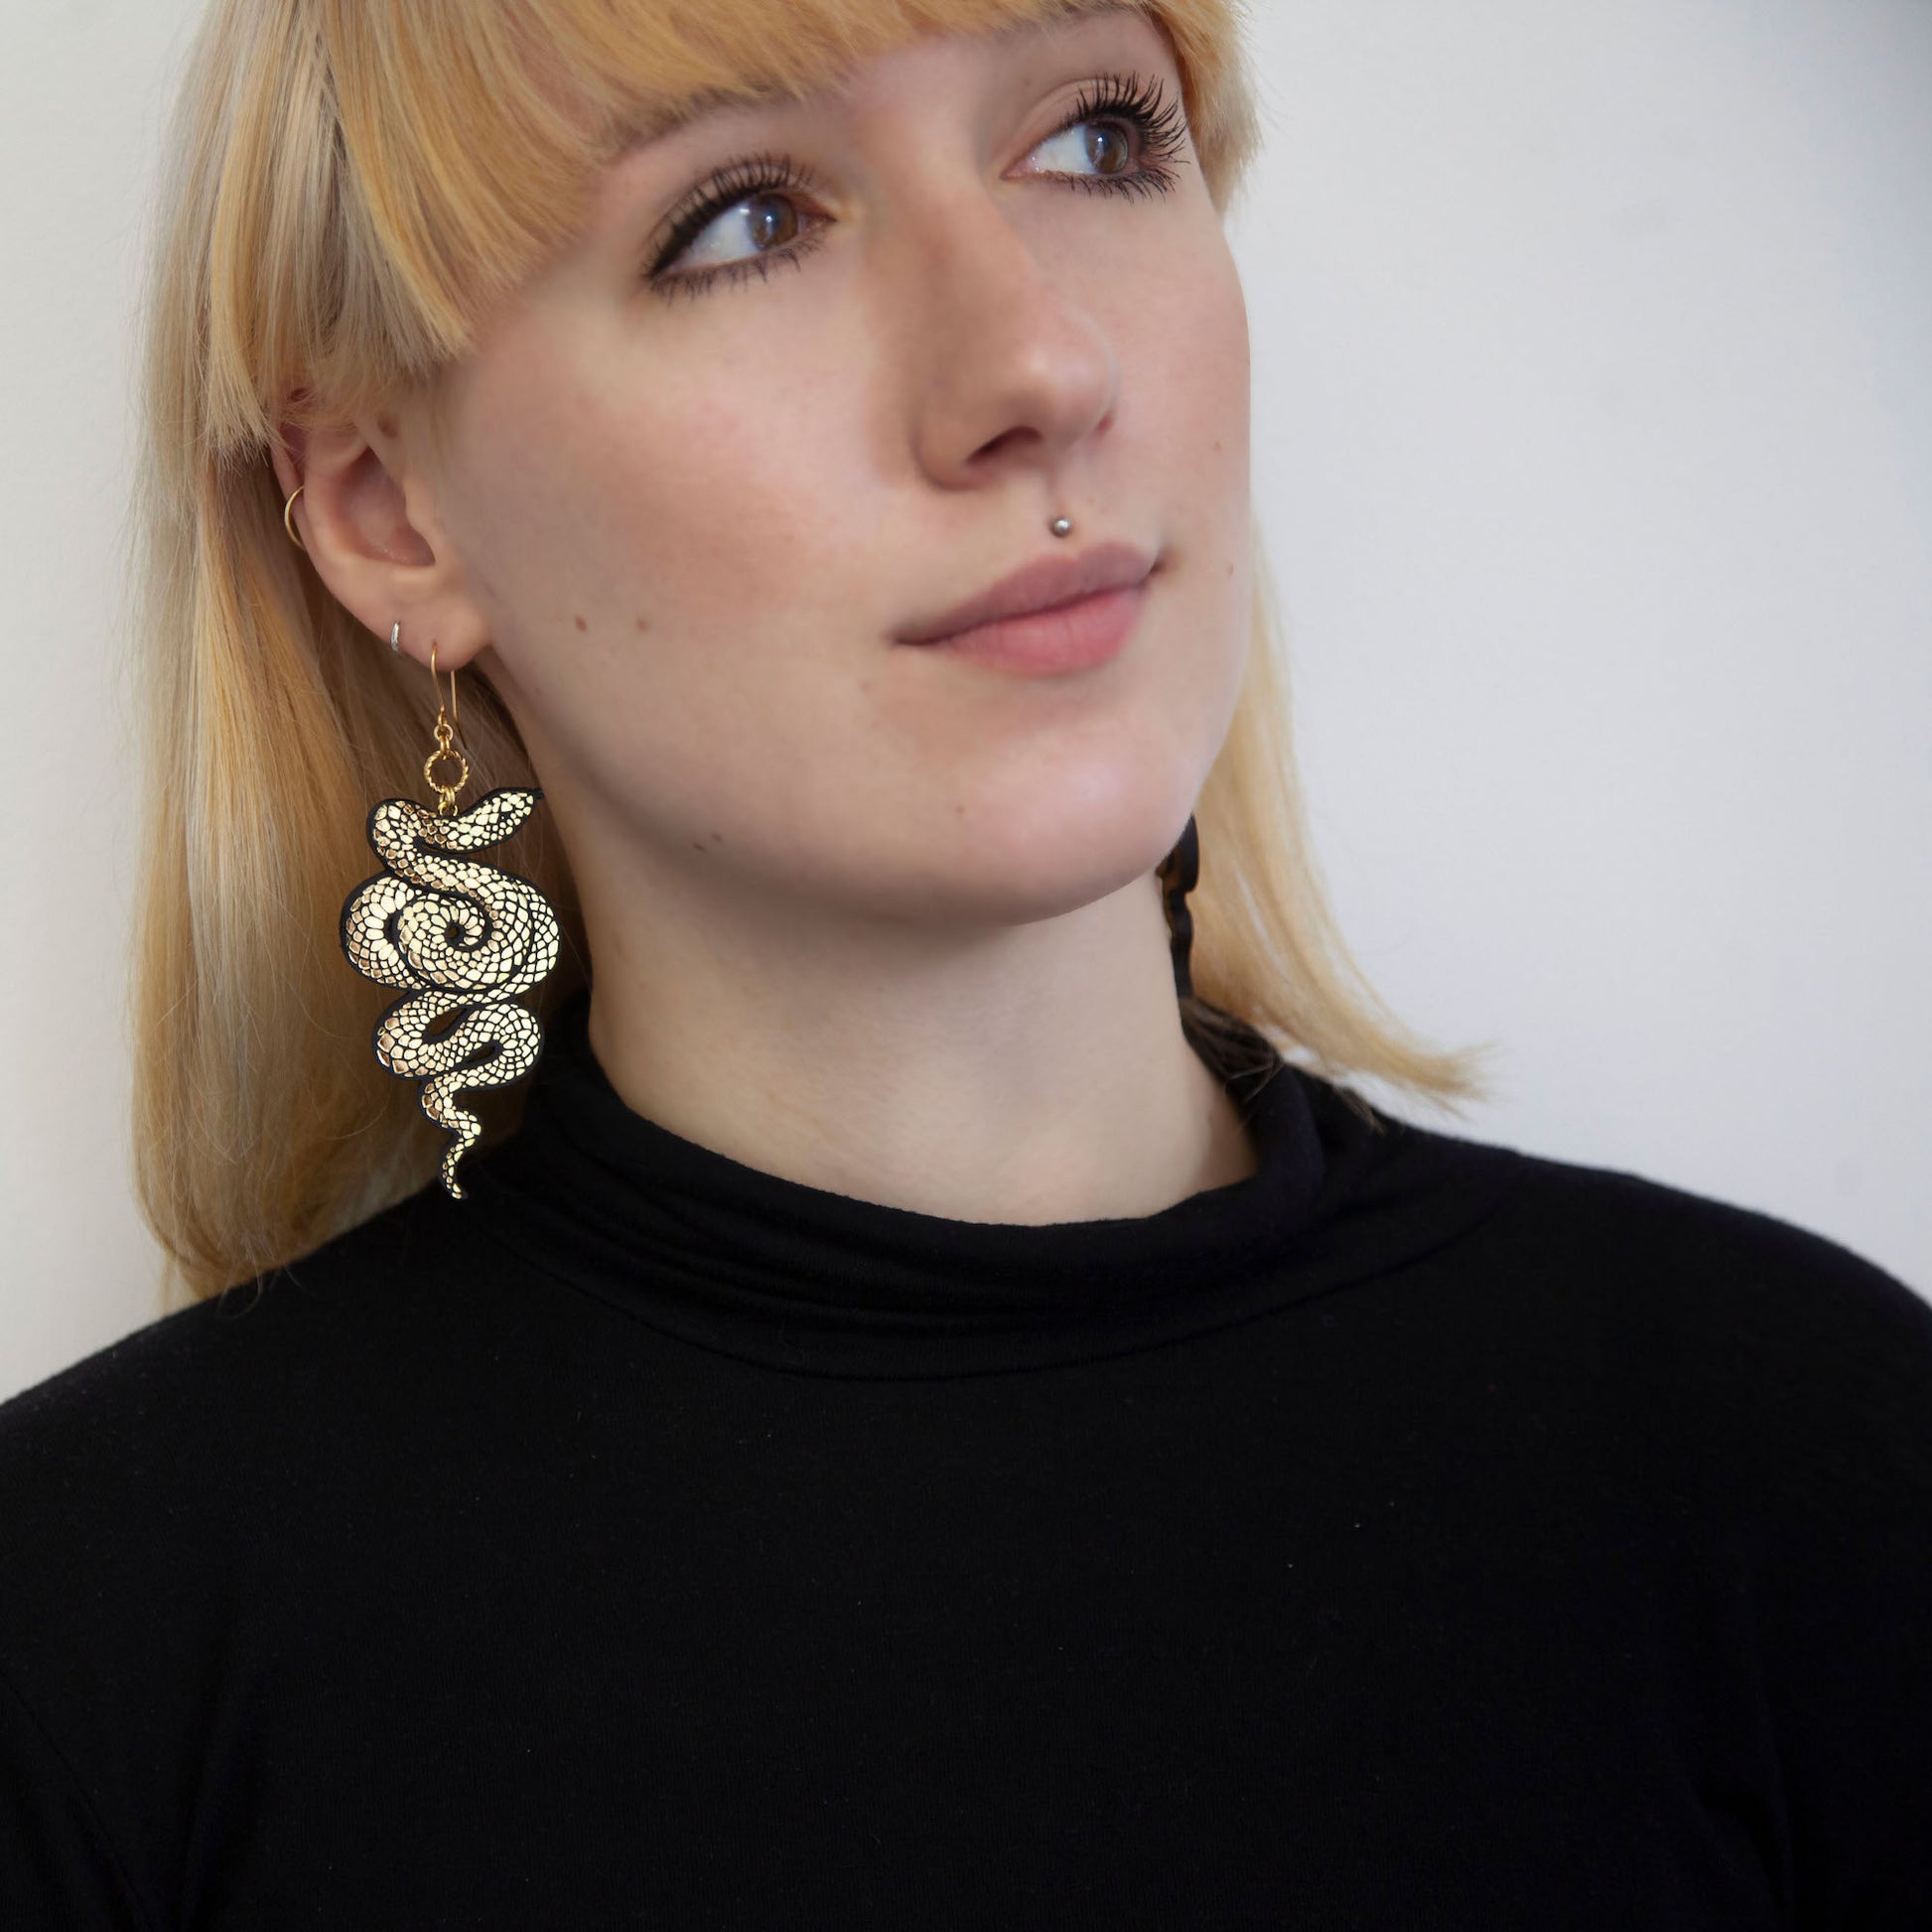 blonde model with black and gold snake earring